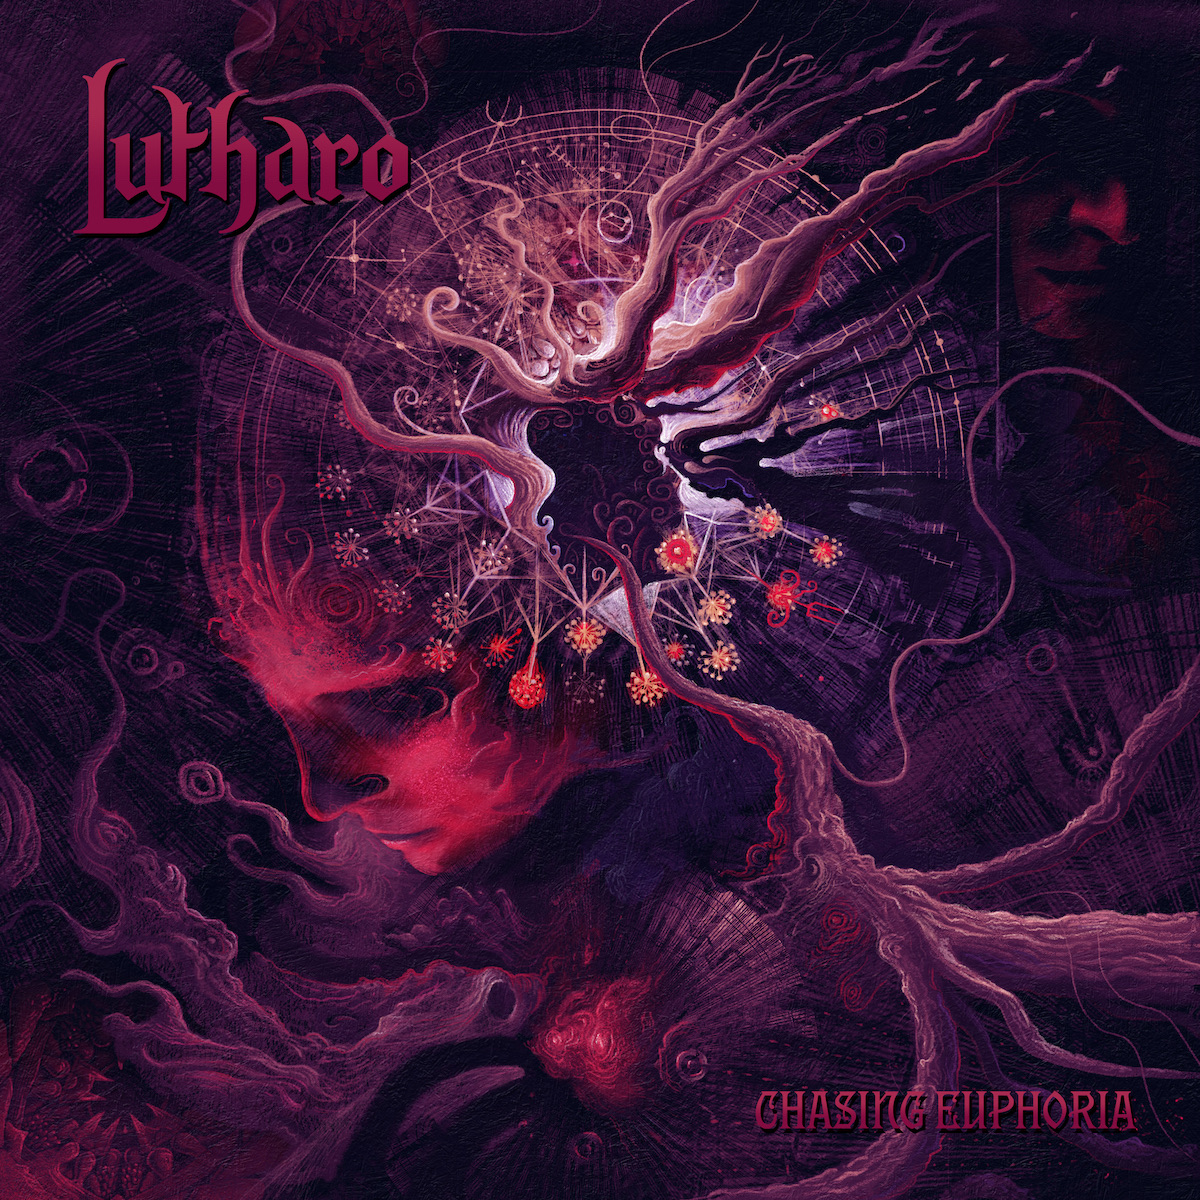 ALBUM REVIEW: Chasing Euphoria by Lutharo